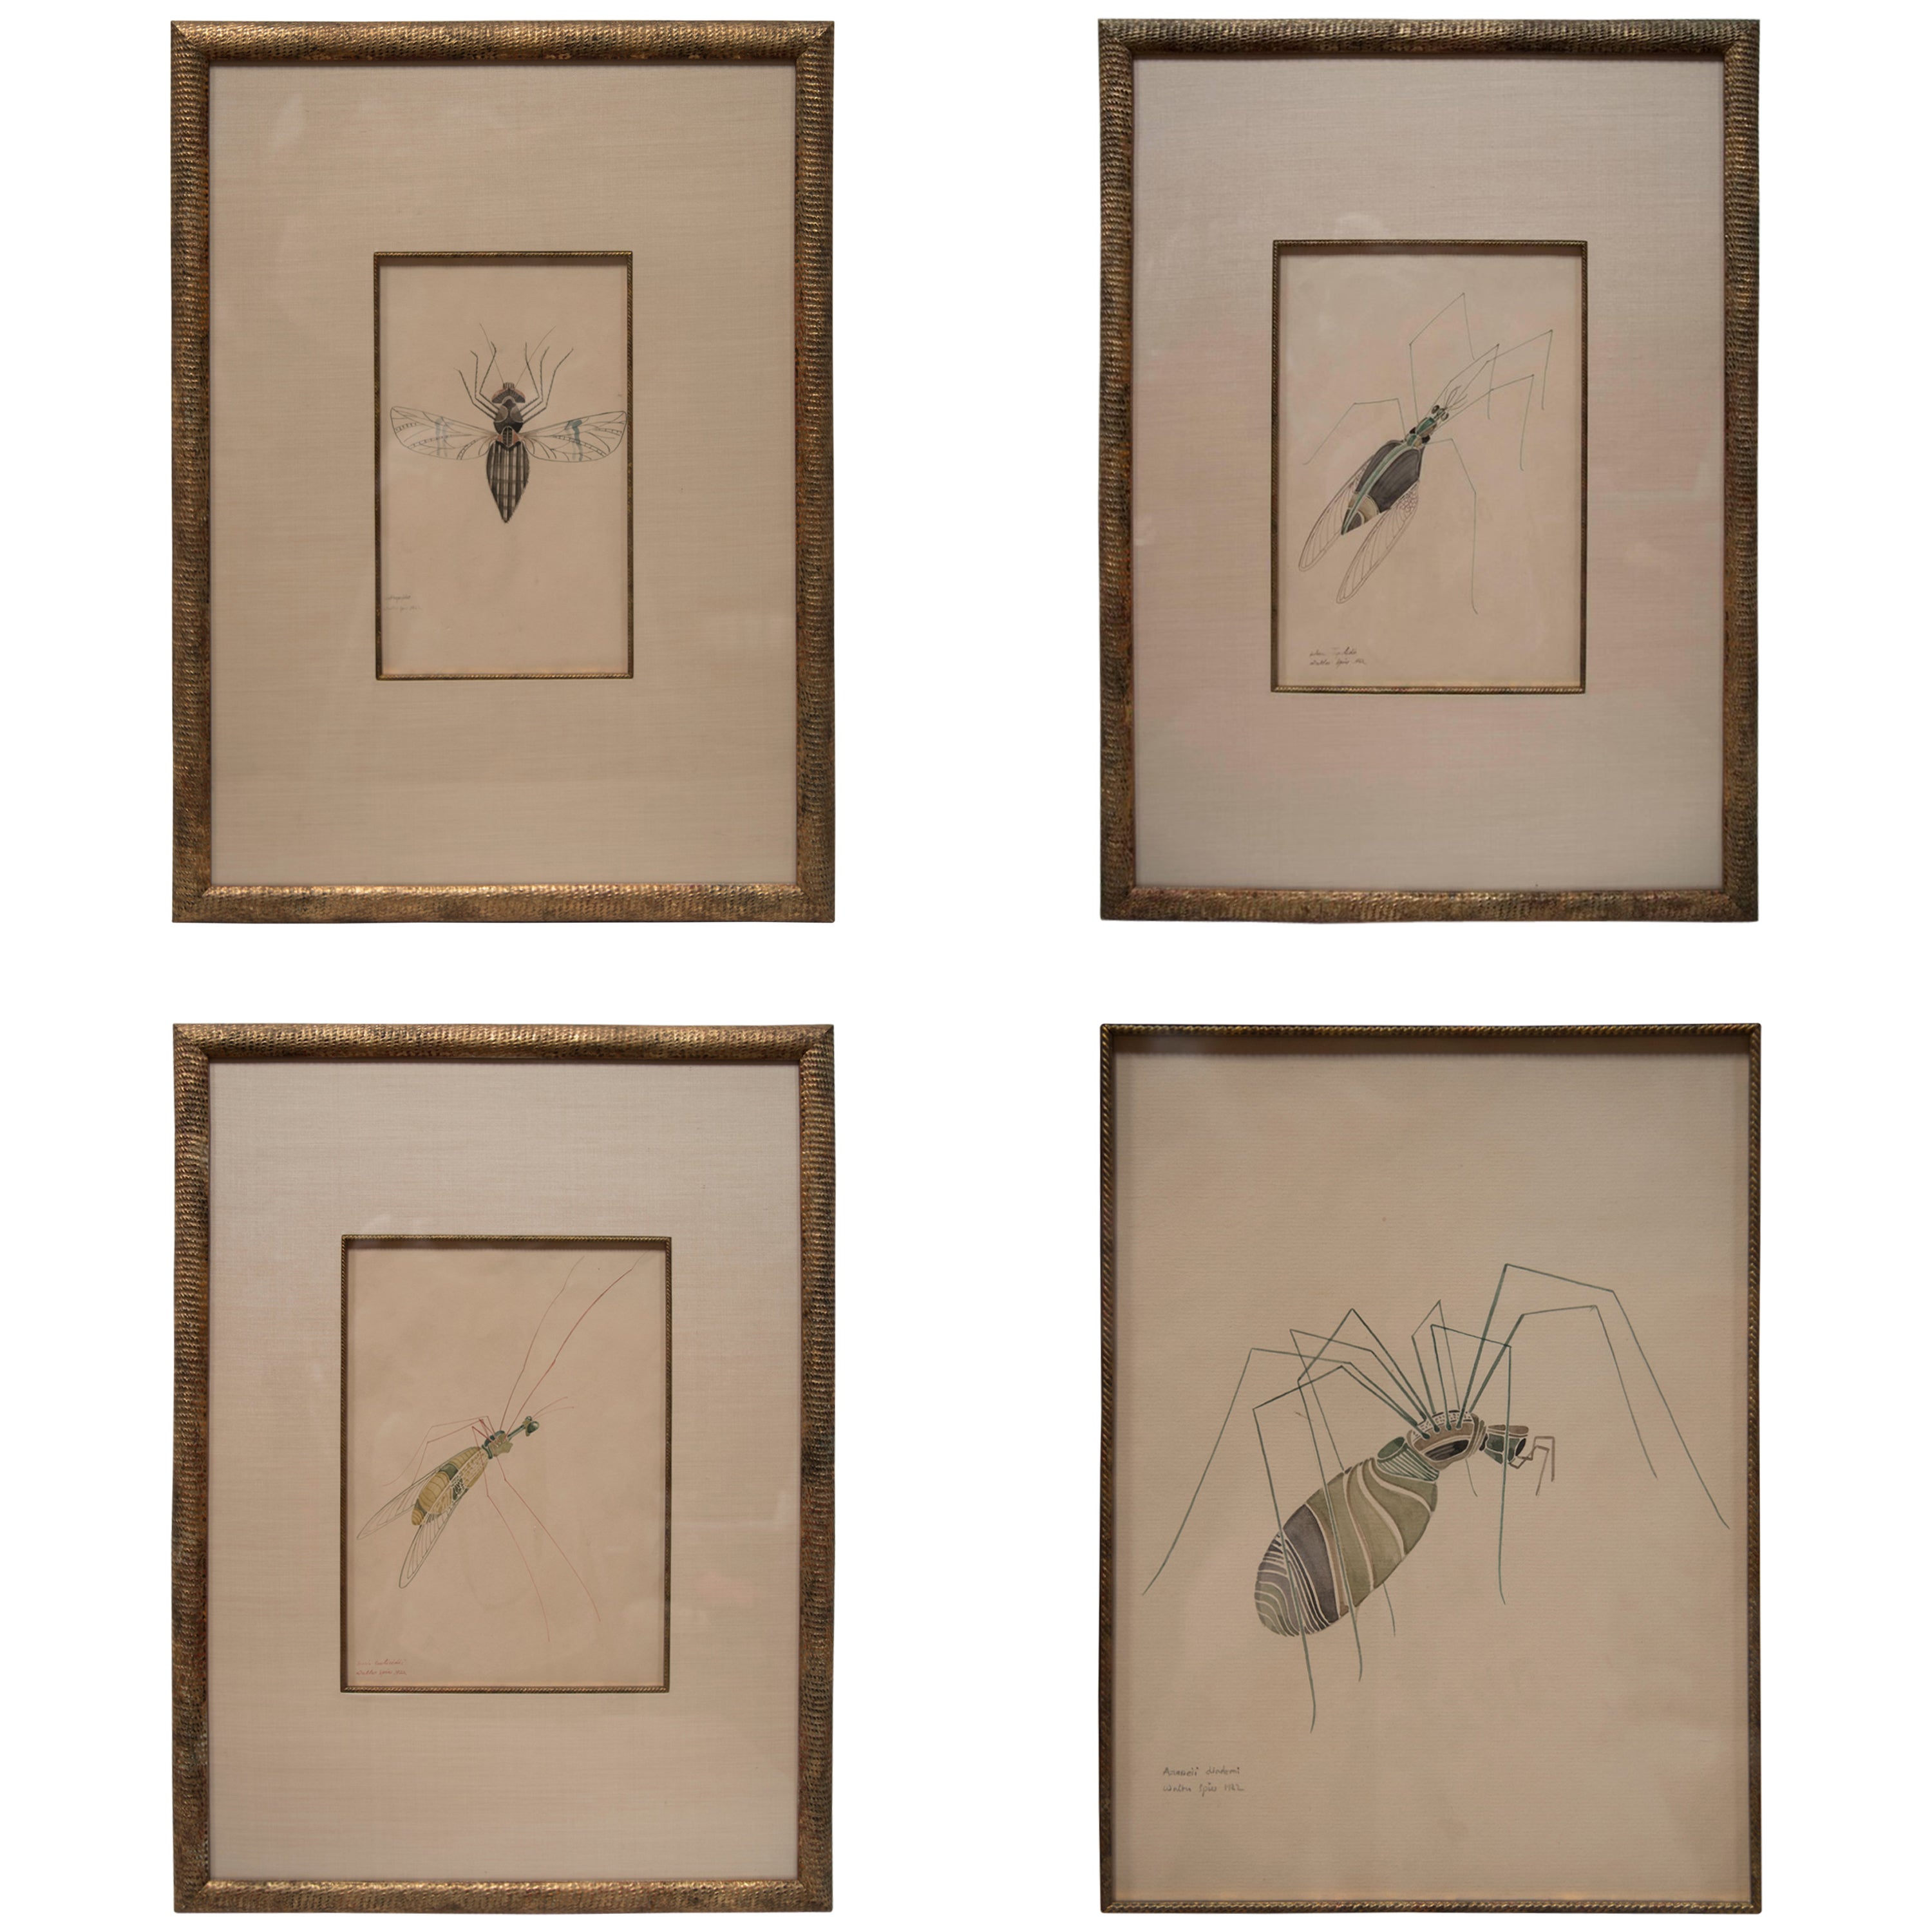 WALTER SPIES WATERCOLOURS [SET OF 4 Insect Drawings]